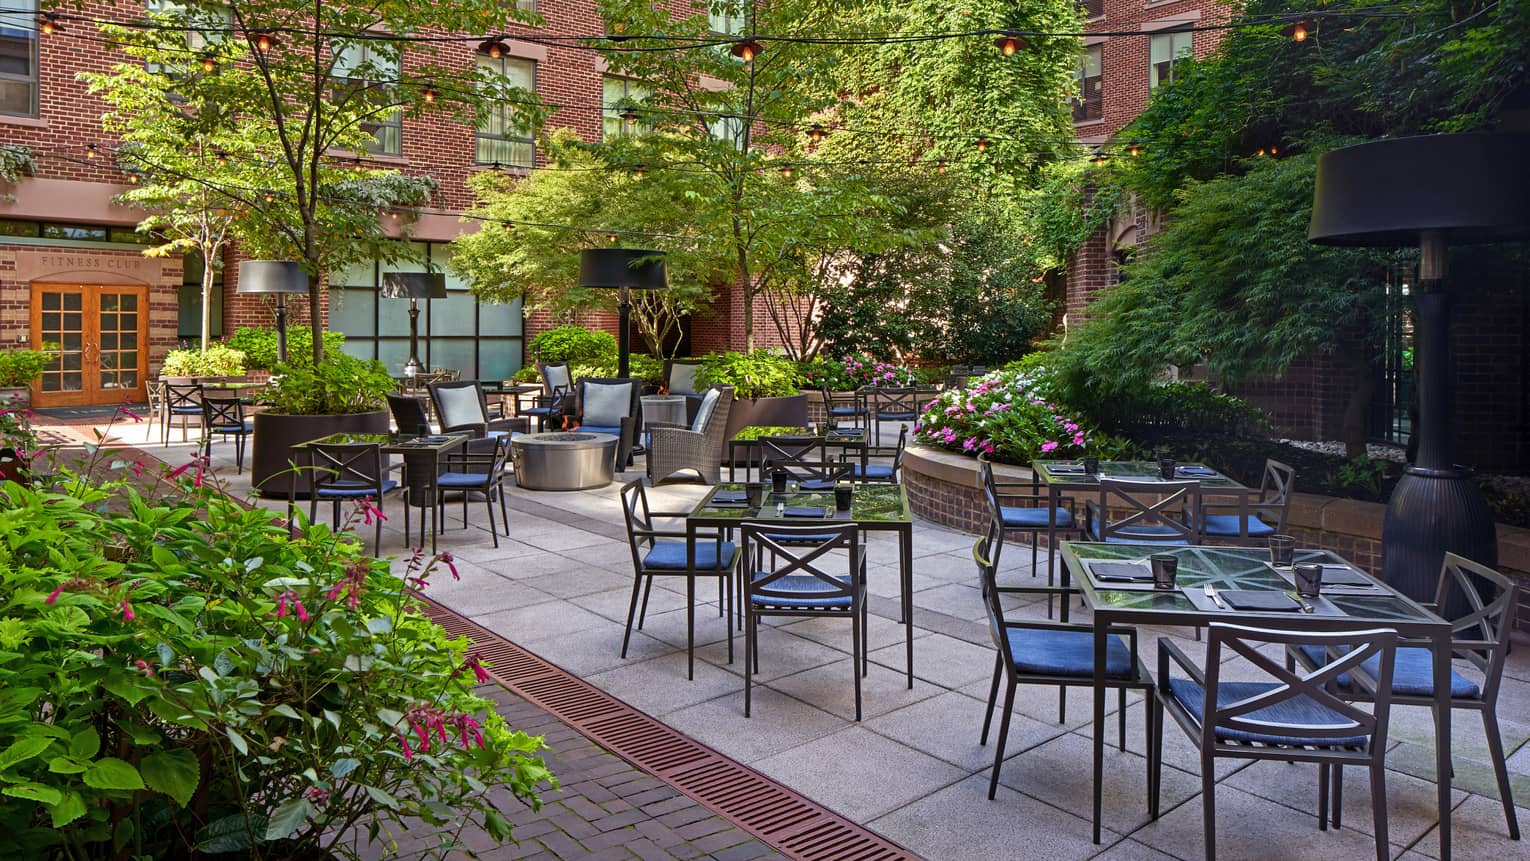 An outdoor eating area with metal chairs and glass tables surrounded by plants.